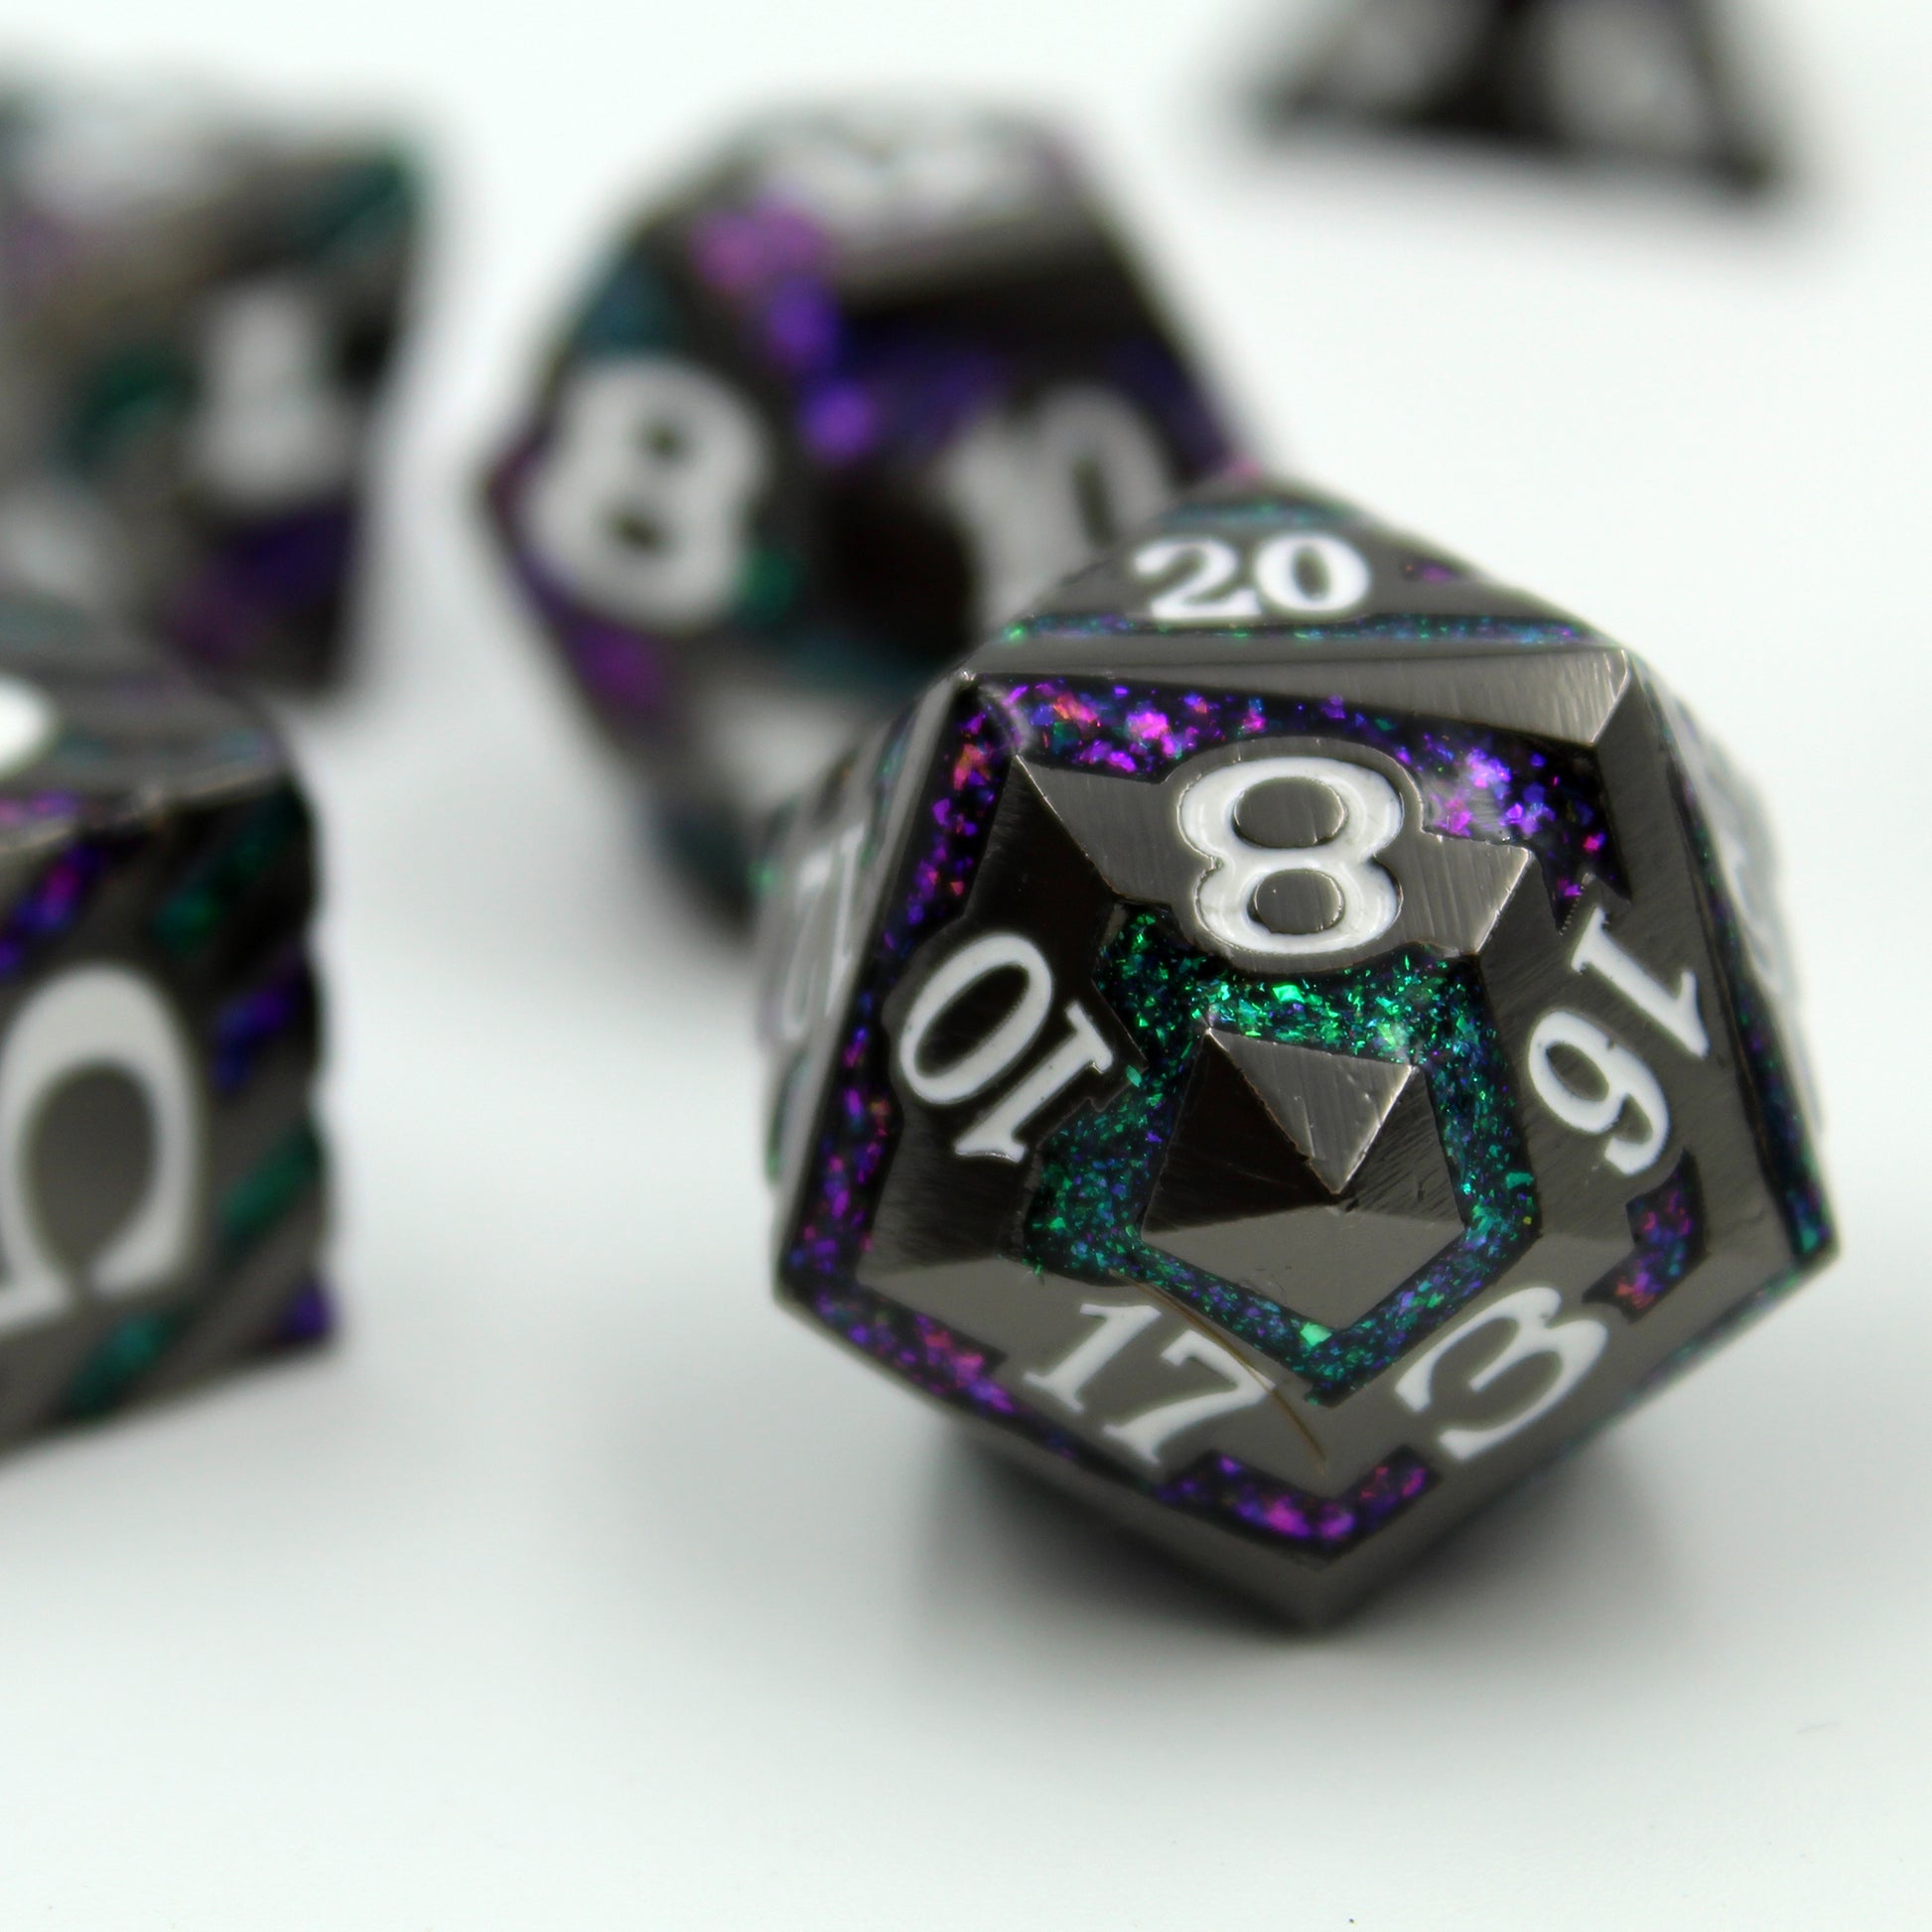 d20 metal dice with stripes of green and purple glitter.